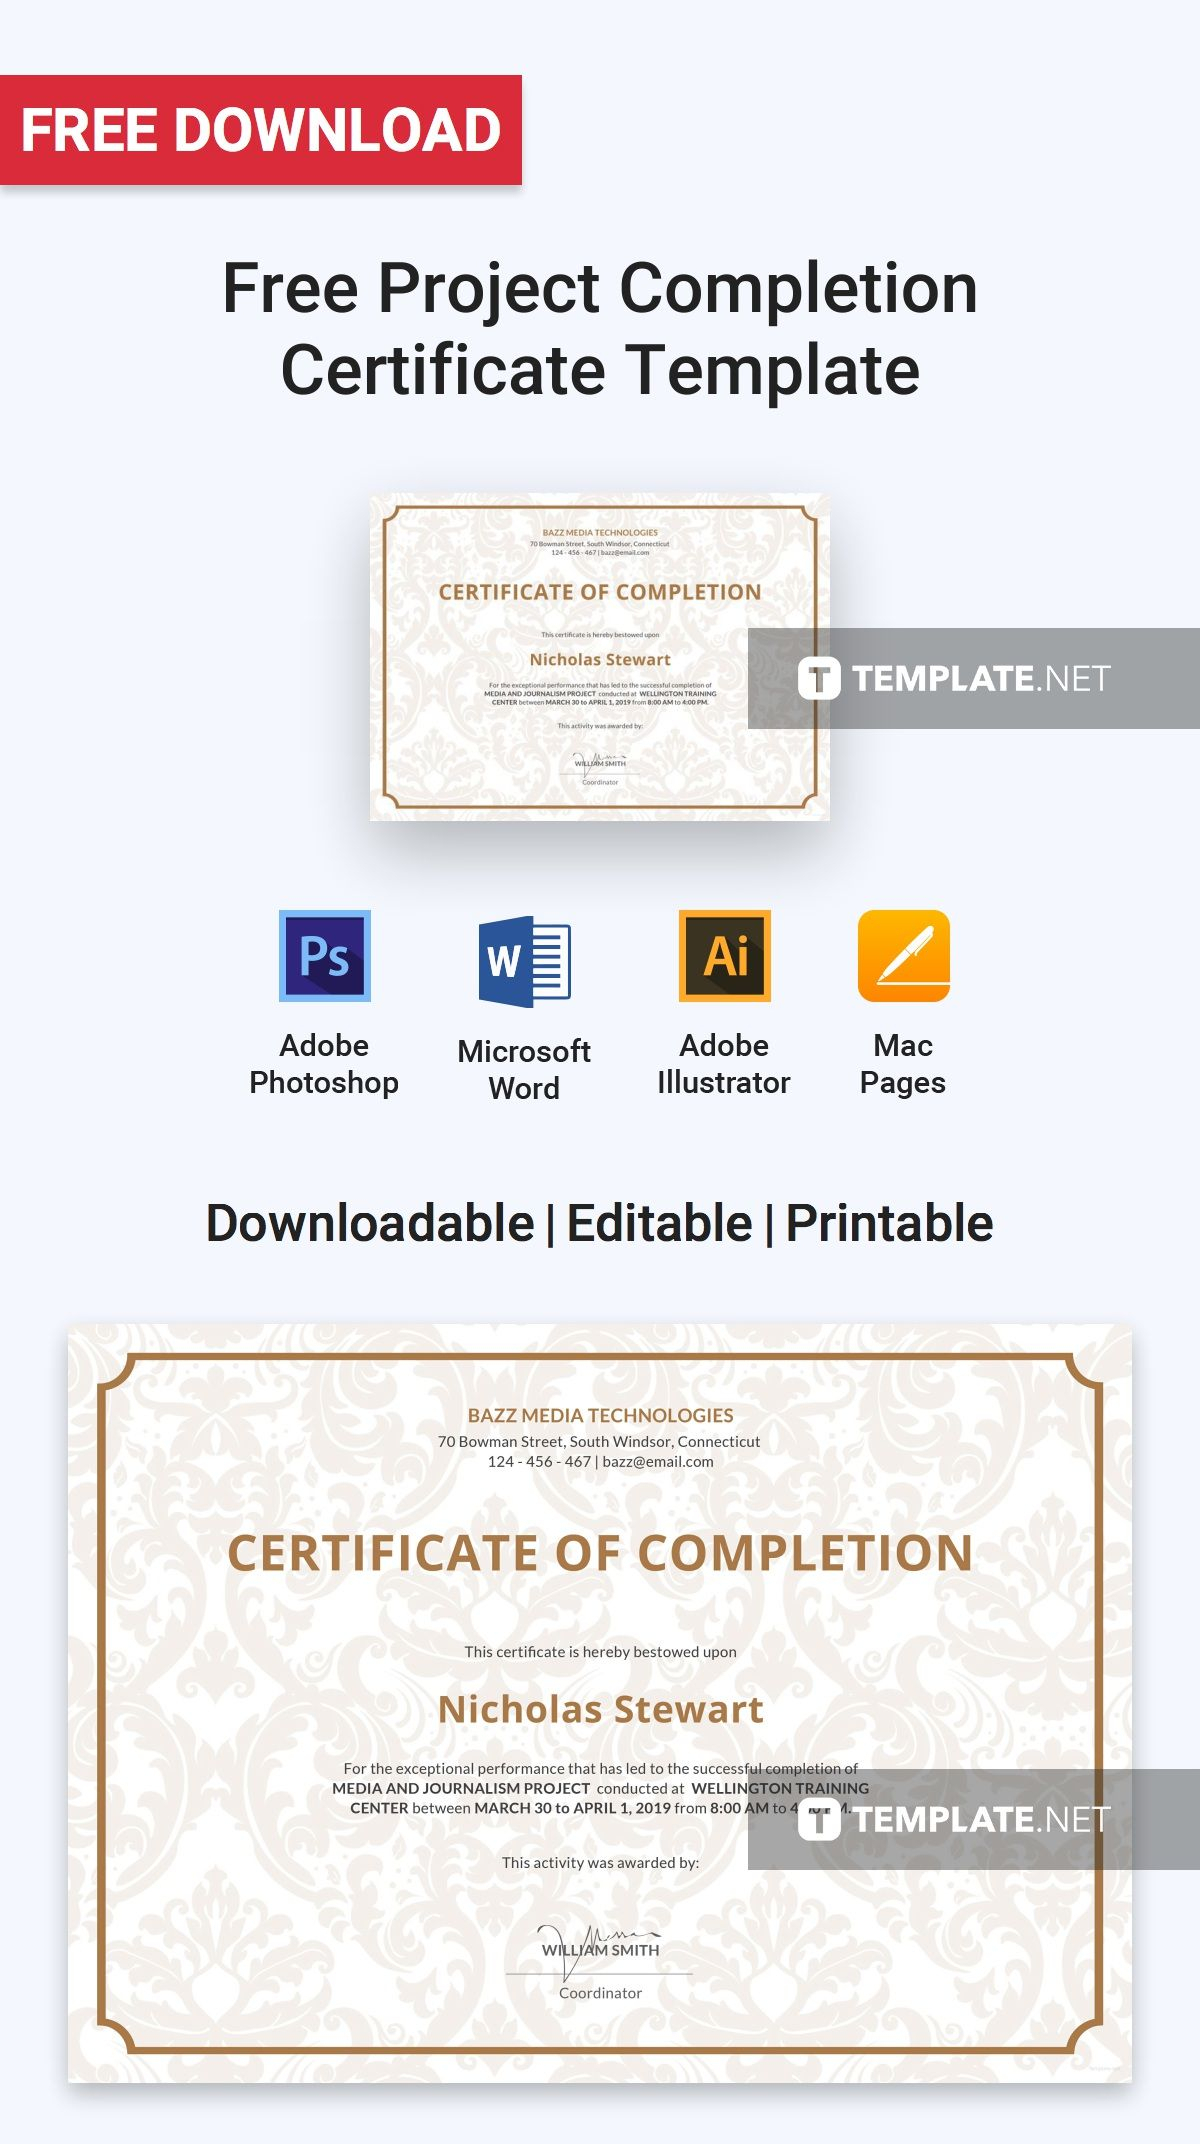 Free Project Completion Certificate | Certificate Templates Inside Certificate Template For Project Completion